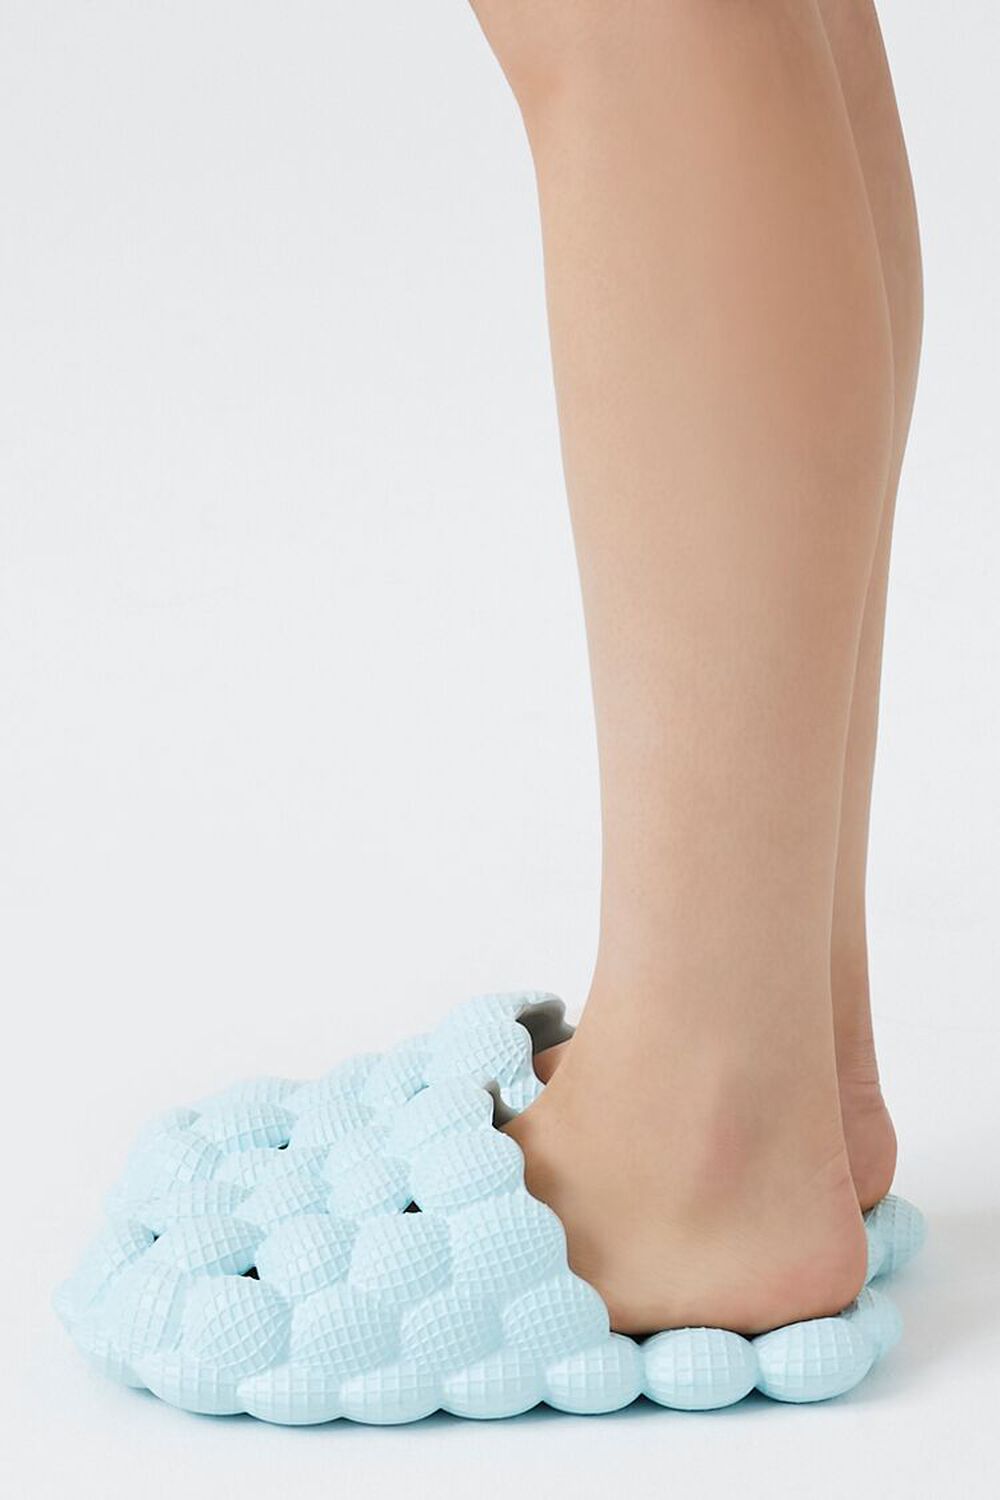 LIGHT BLUE Puffy Bubble Slippers, image 2